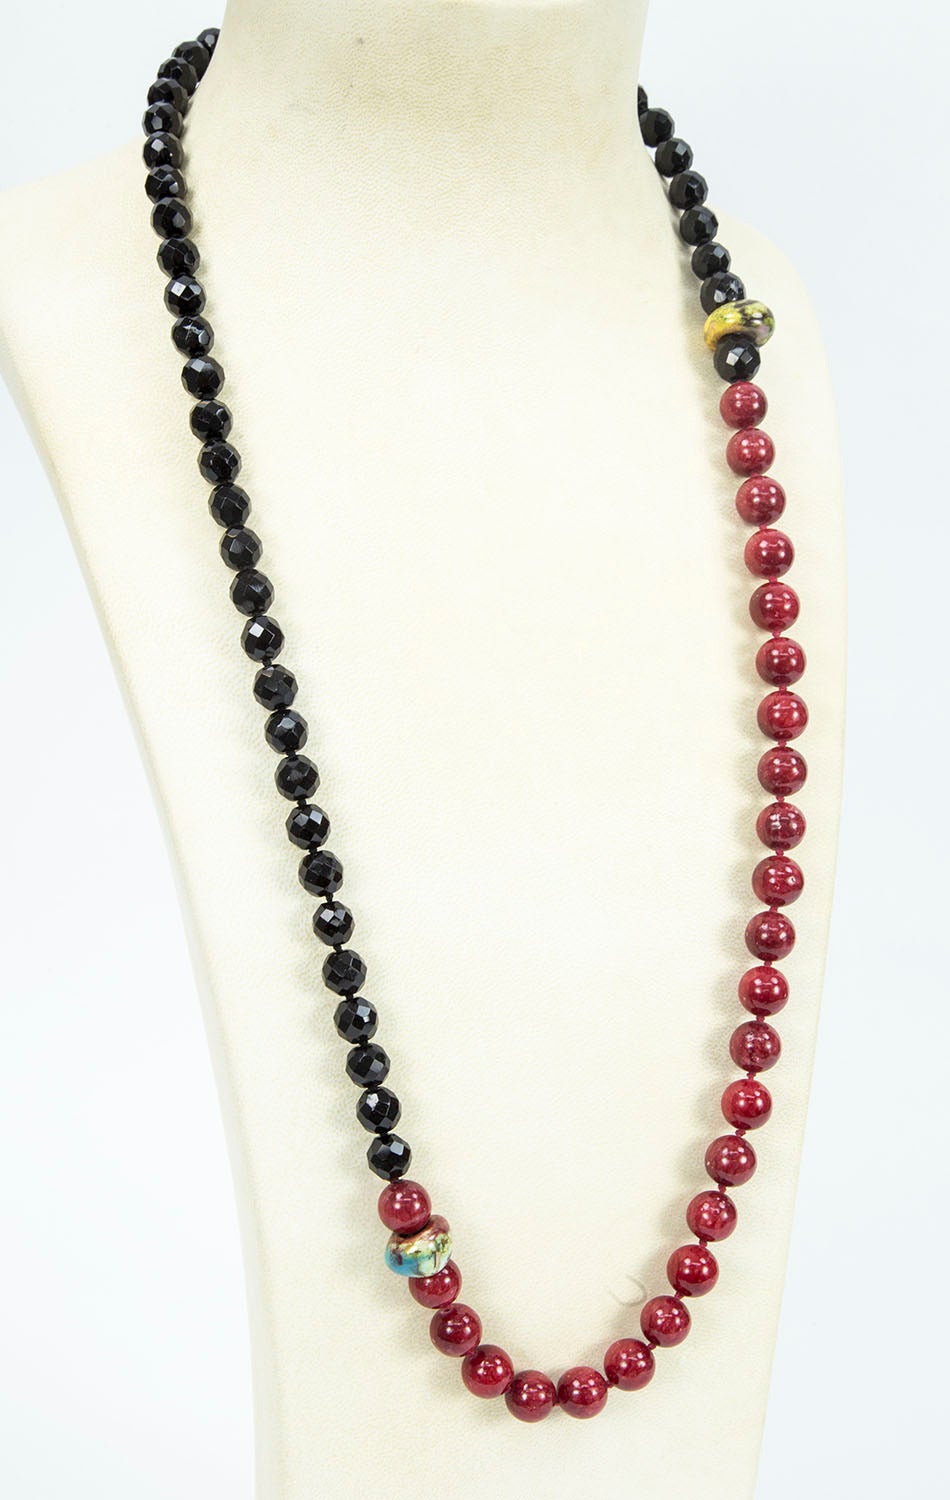 Unique Black Jet and Red Agate Necklace; hand knotted with matching color silk threads; enhanced by 2 Fimo beads; faceted black jet beads are approx. 10mm and the red agate beads 12mm-12.5mm; strand measures approx. 34” long. Add Pizzazz and style